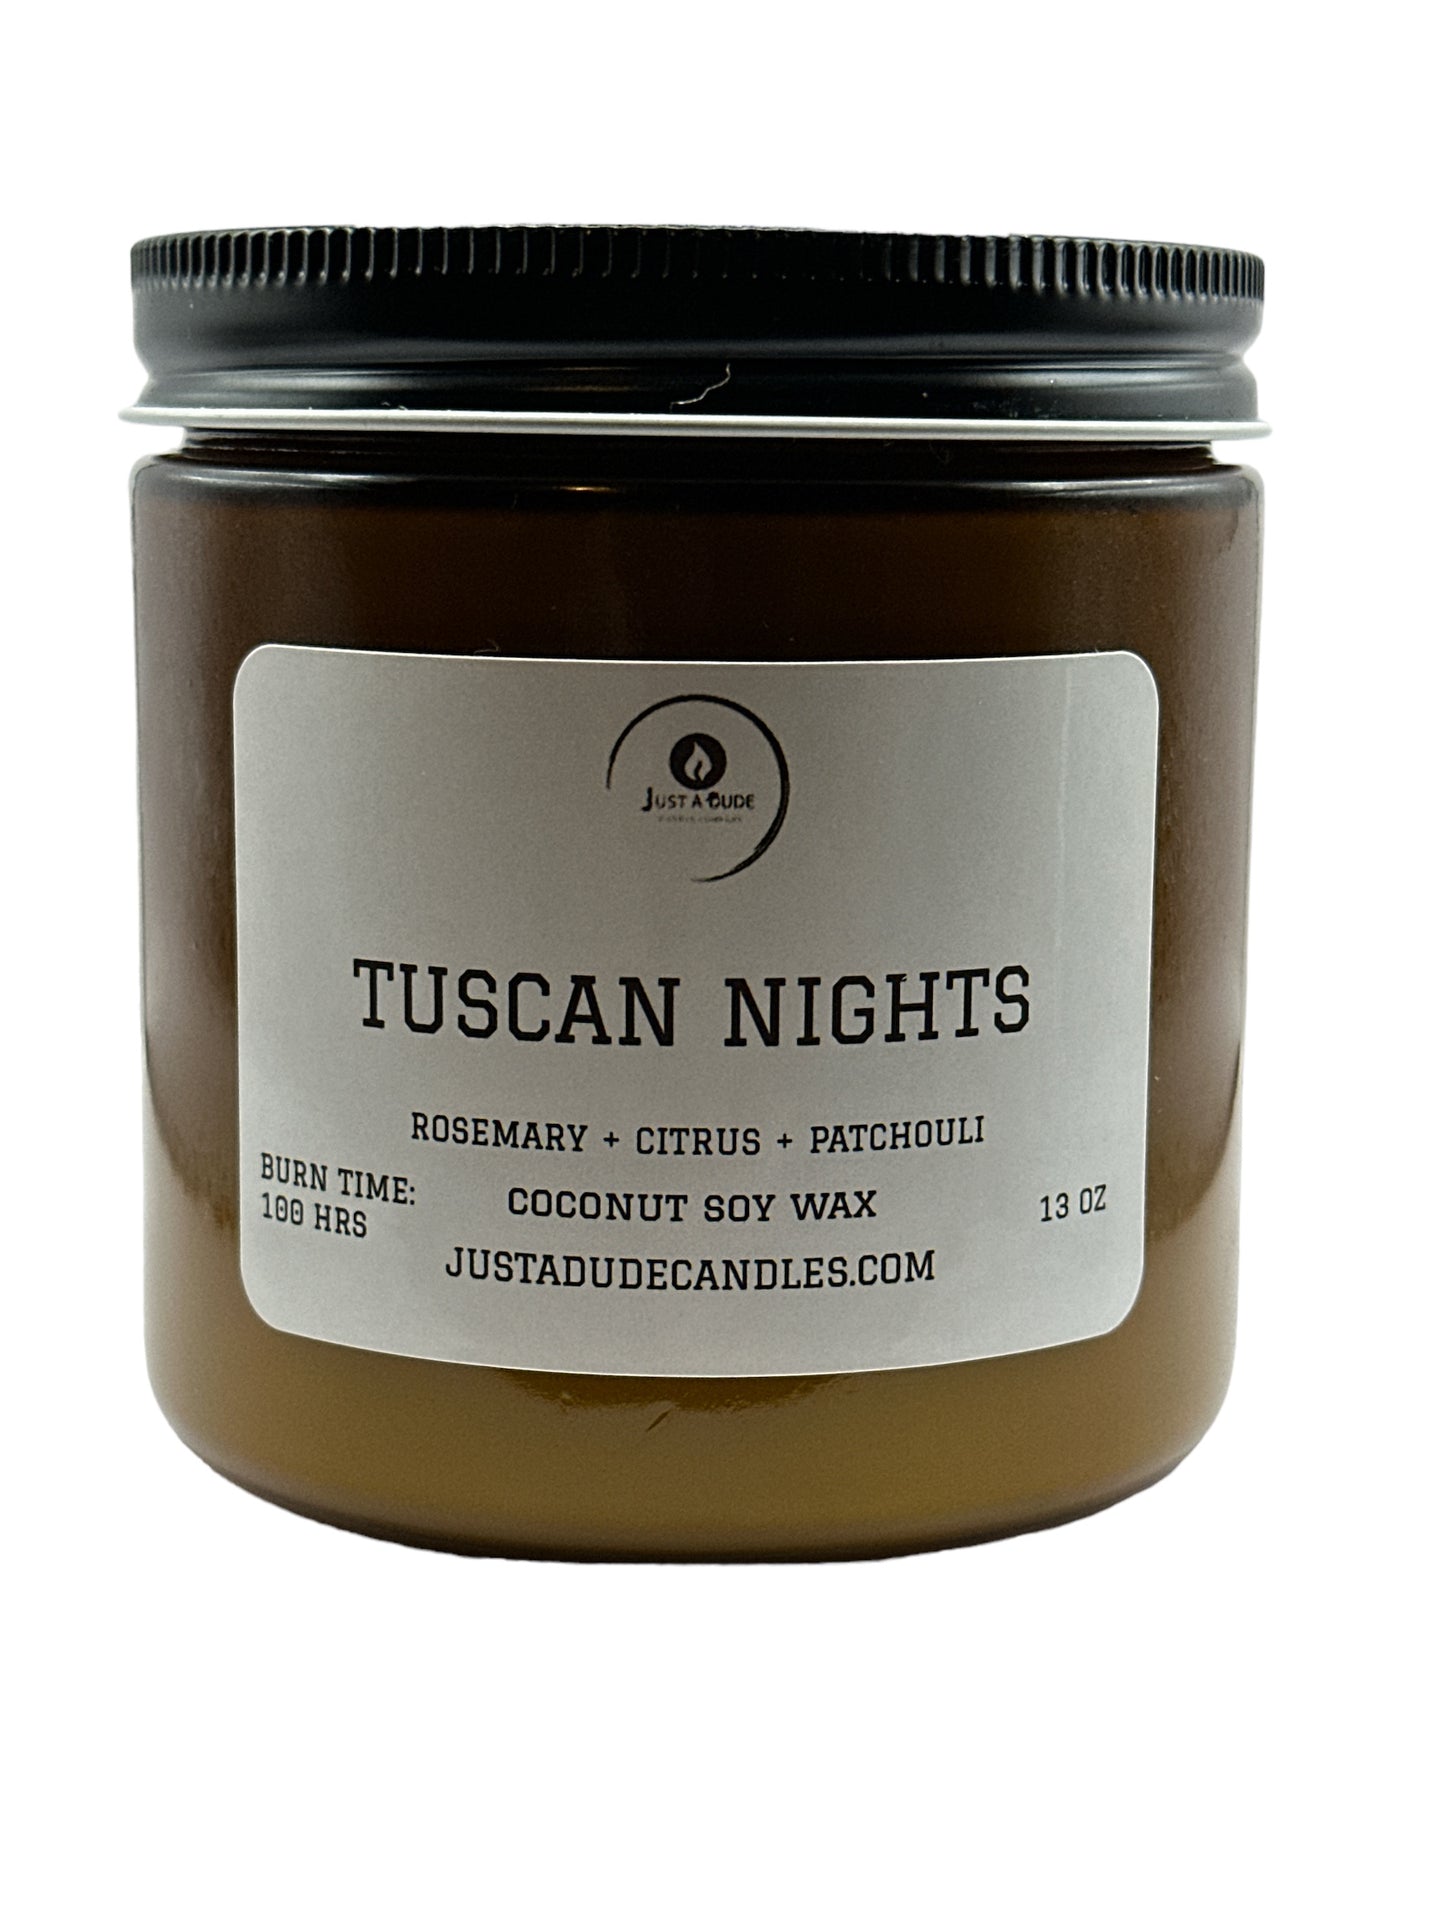 TUSCAN NIGHTS (ROSEMARY + CITRUS + PATCHOULI) AMBER JAR COLLECTION